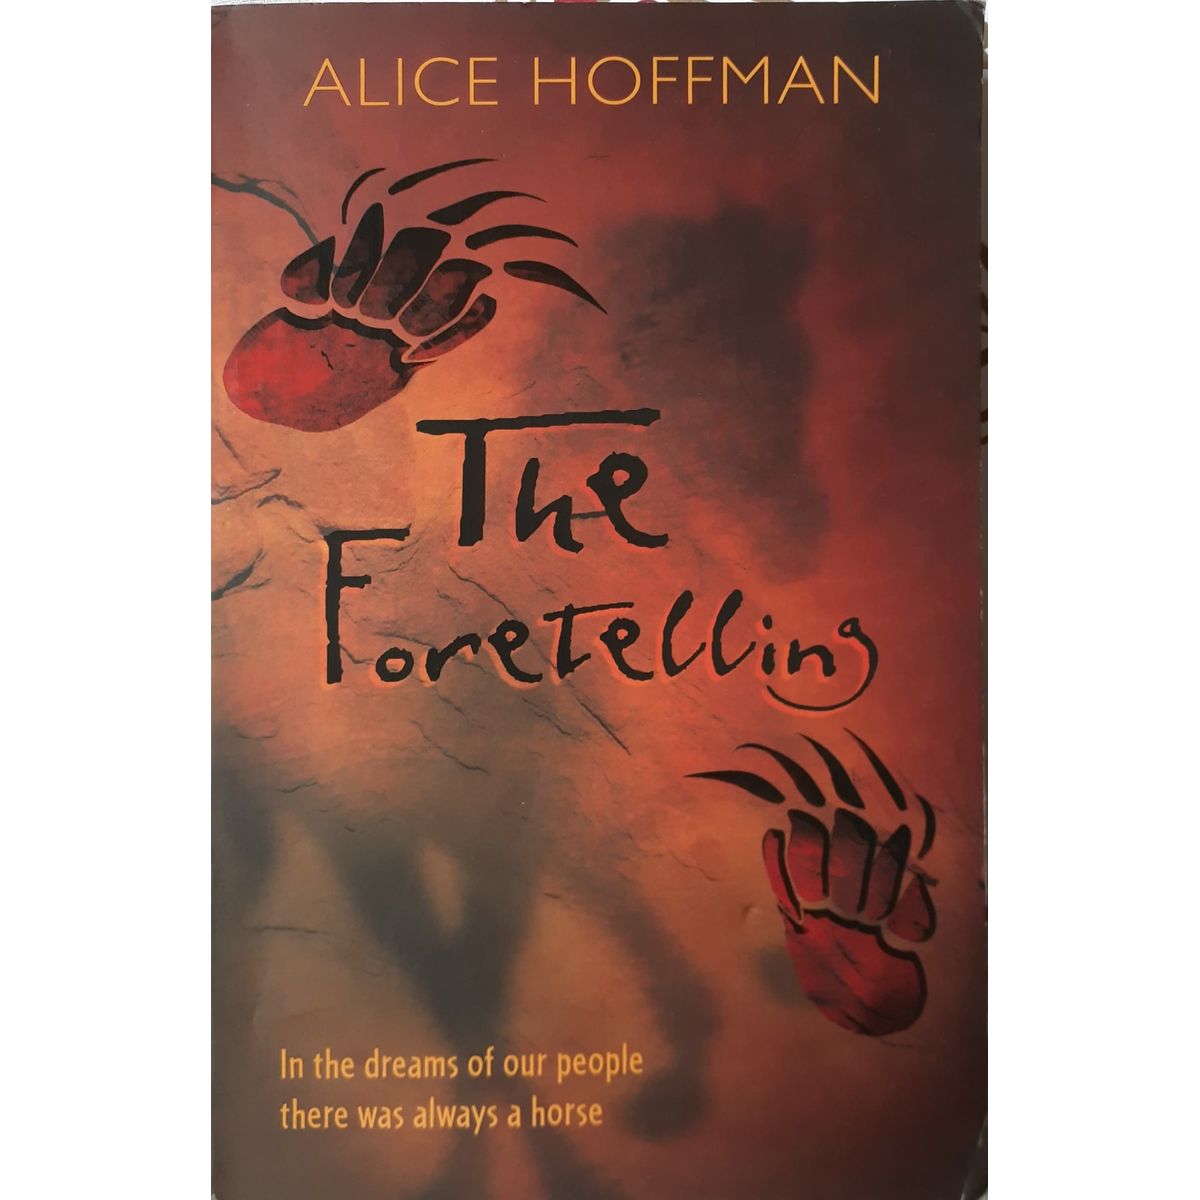 ISBN: 9781405224246 / 140522424X - The Foretelling by Alice Hoffman [2006]